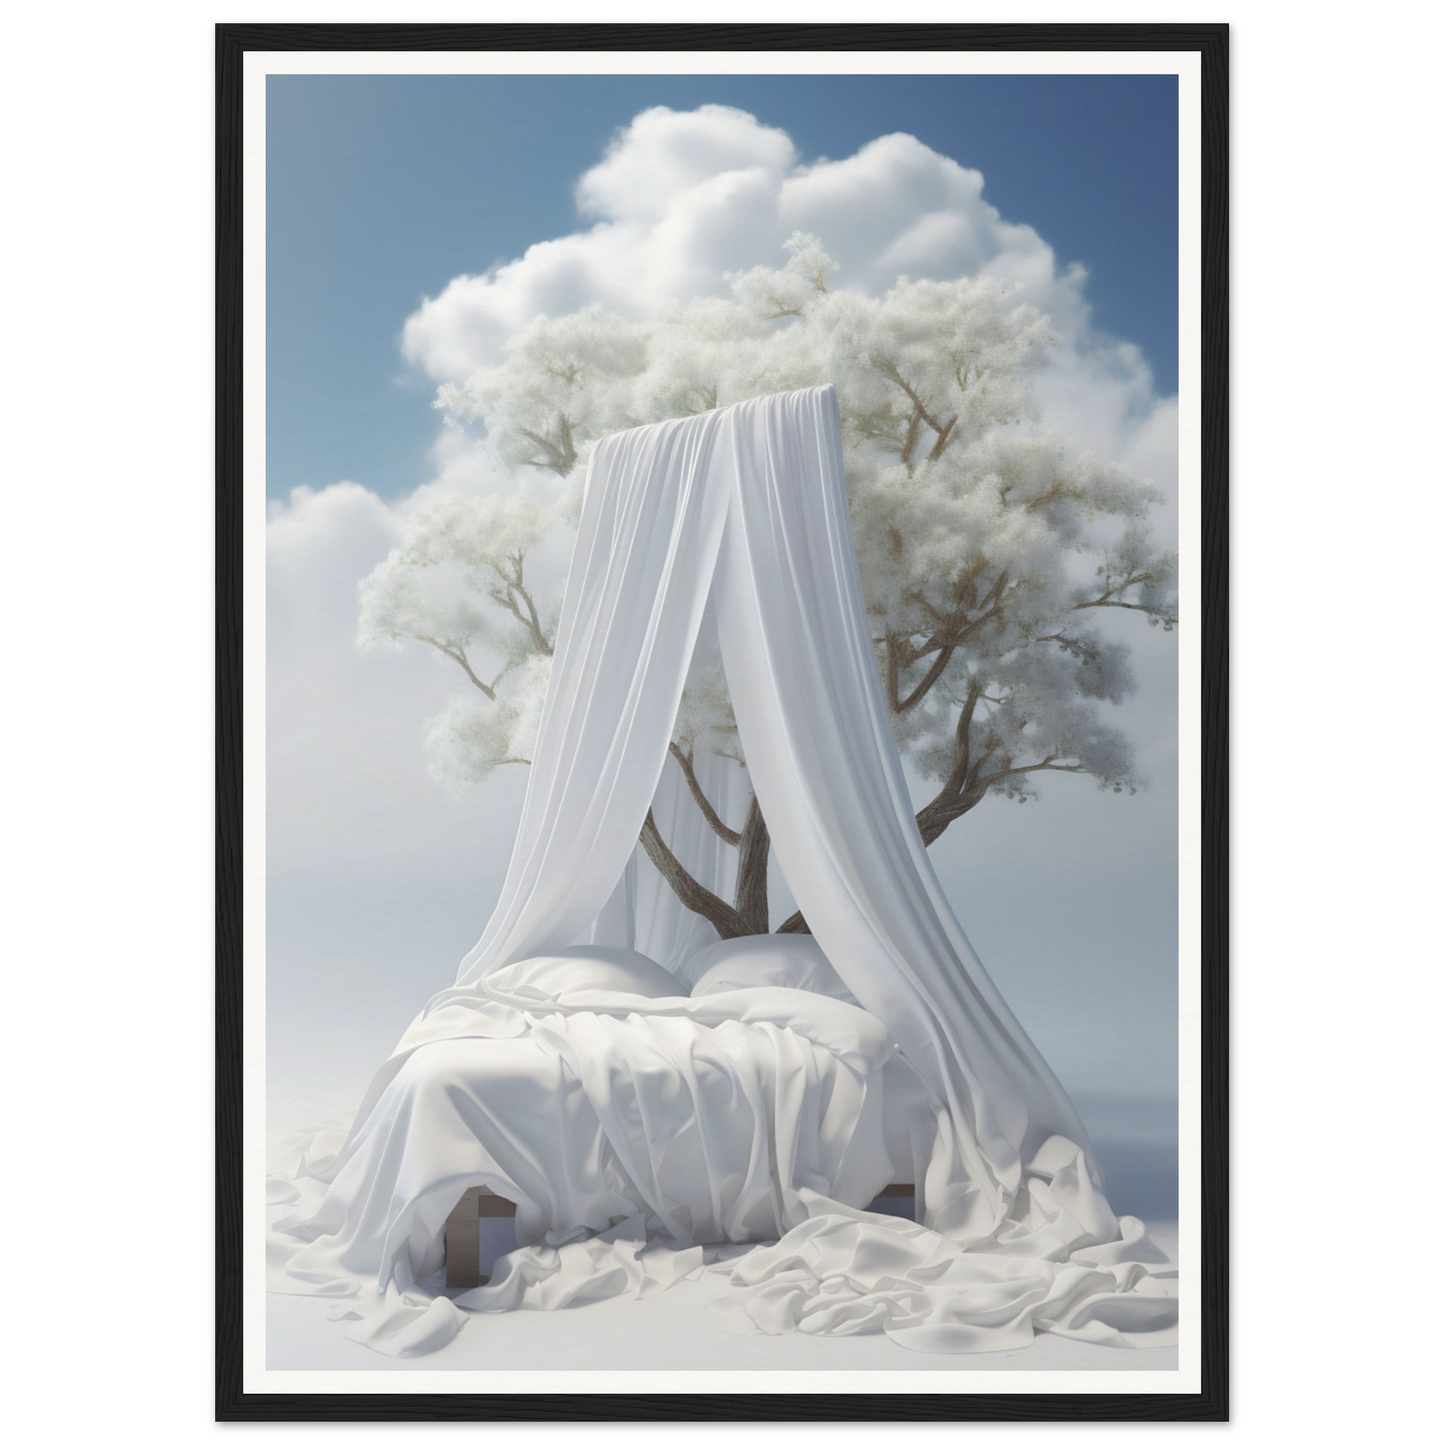 An image of a Paradise Found A The Oracle Windows™ Collection bed with white sheets, perfect for a high quality poster for my wall.